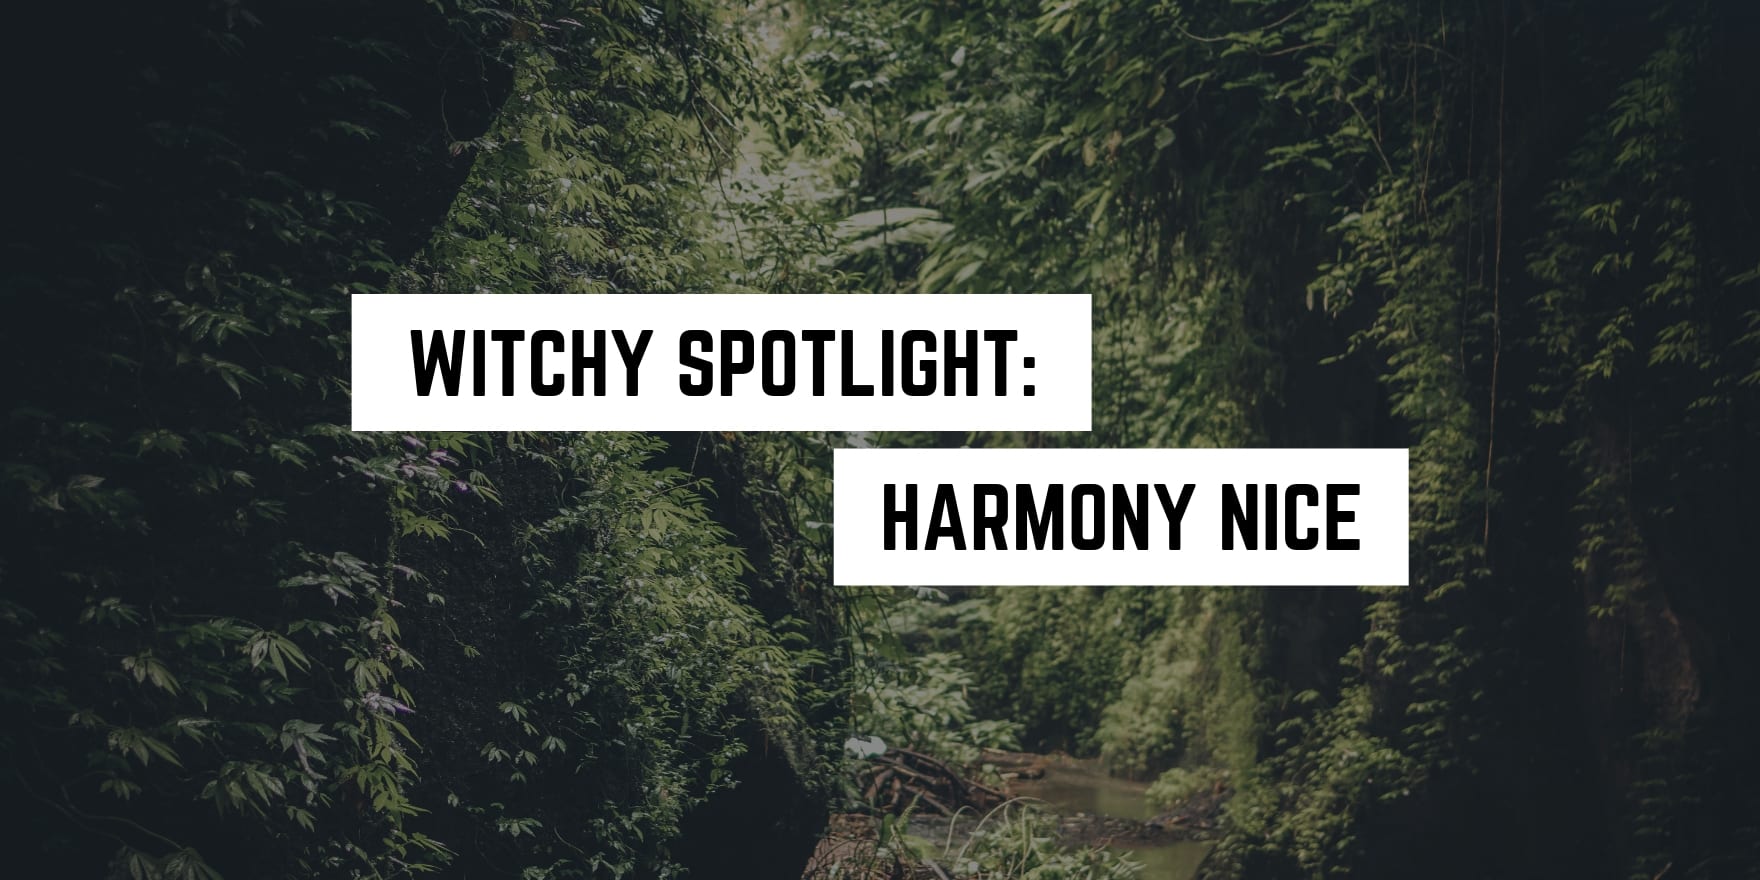 A serene forest pathway enveloped by lush greenery, highlighted as the backdrop for a feature titled "witchy spotlight: harmony nice" in a popular metaphysical shop's spiritual newsletter.